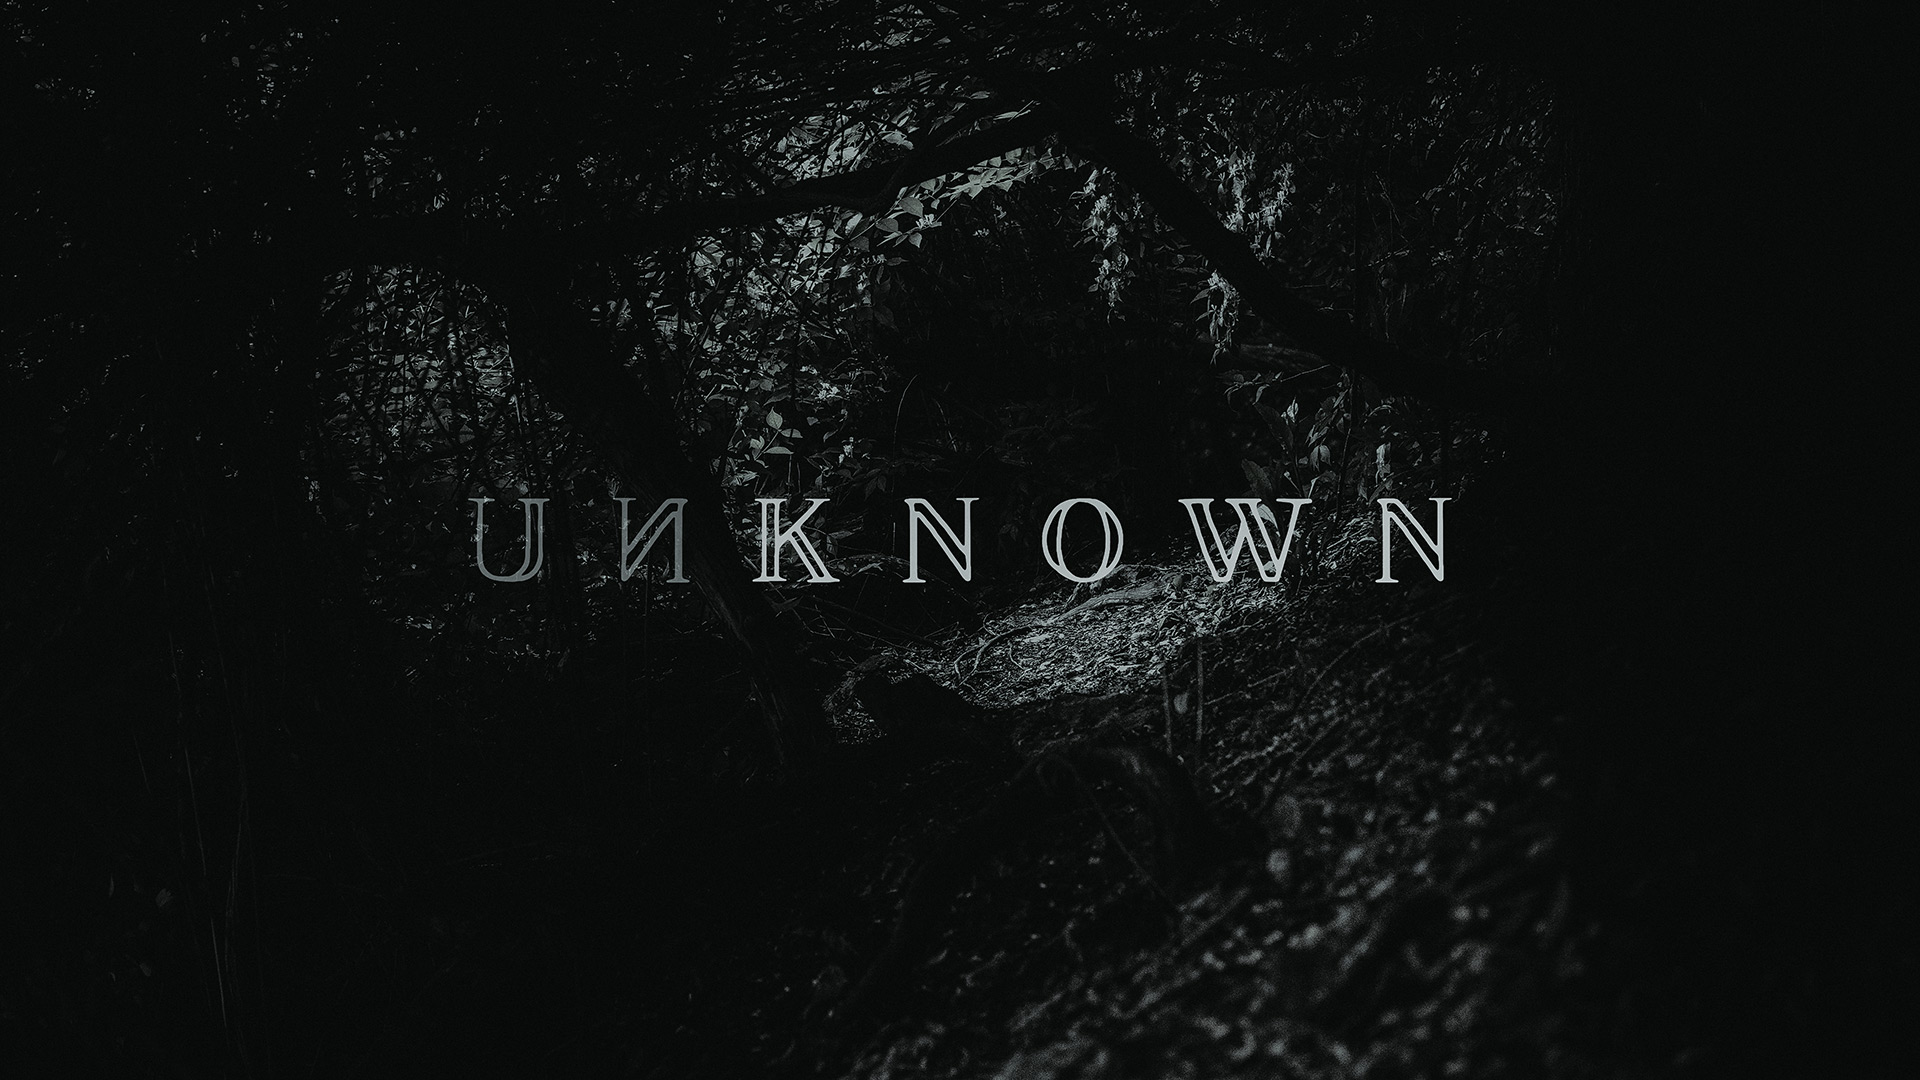 Series artwork for "Unknown"